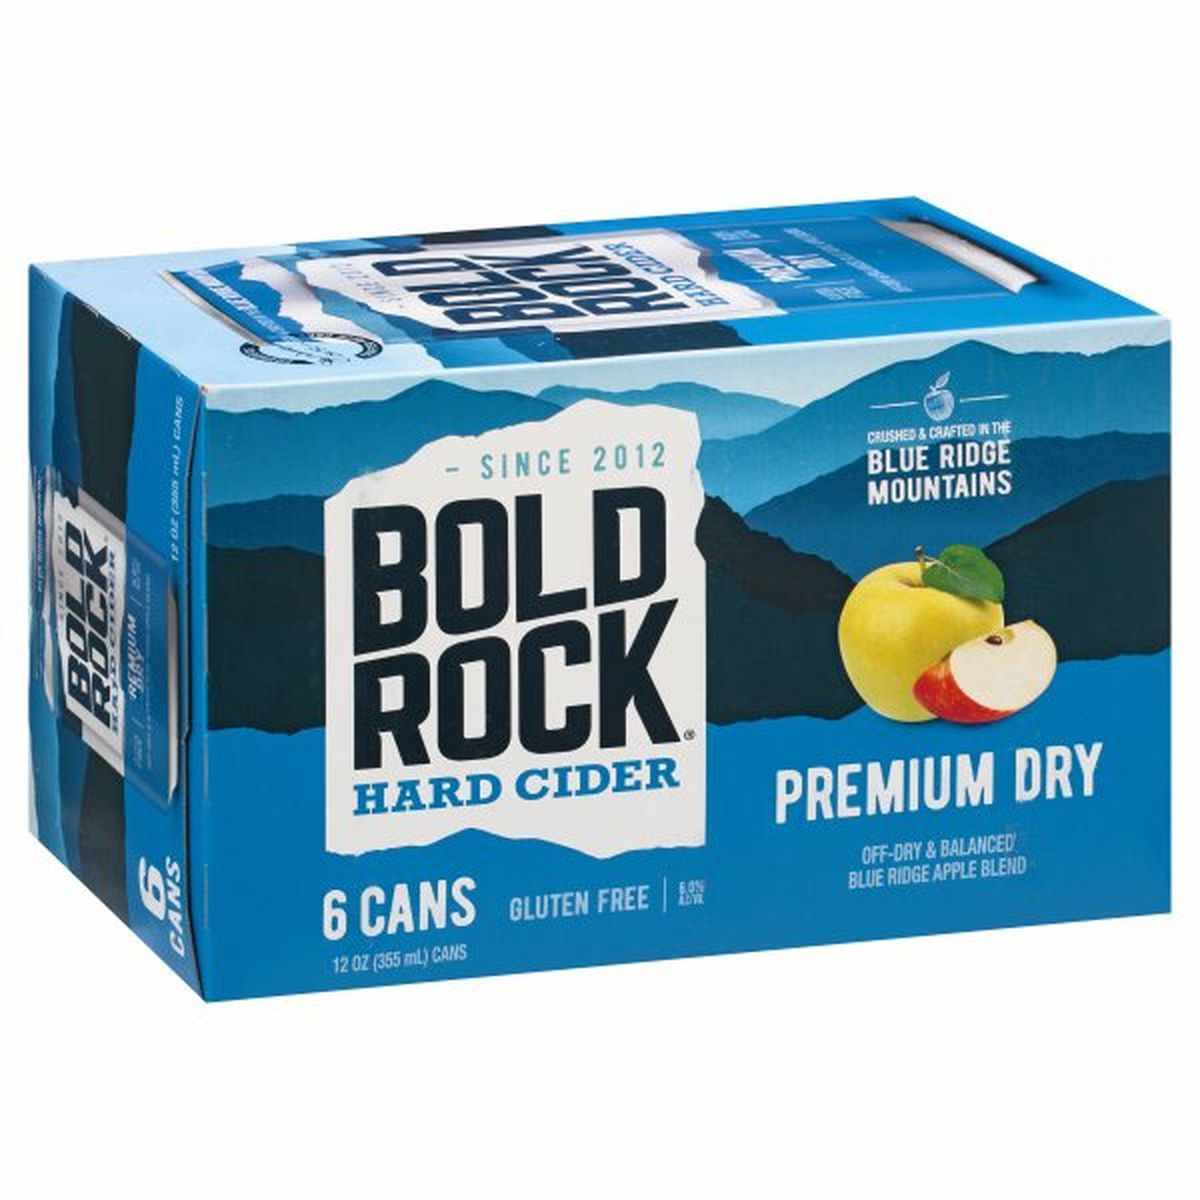 Calories in Bold Rock Premium Dry Cider  6/12 oz cans